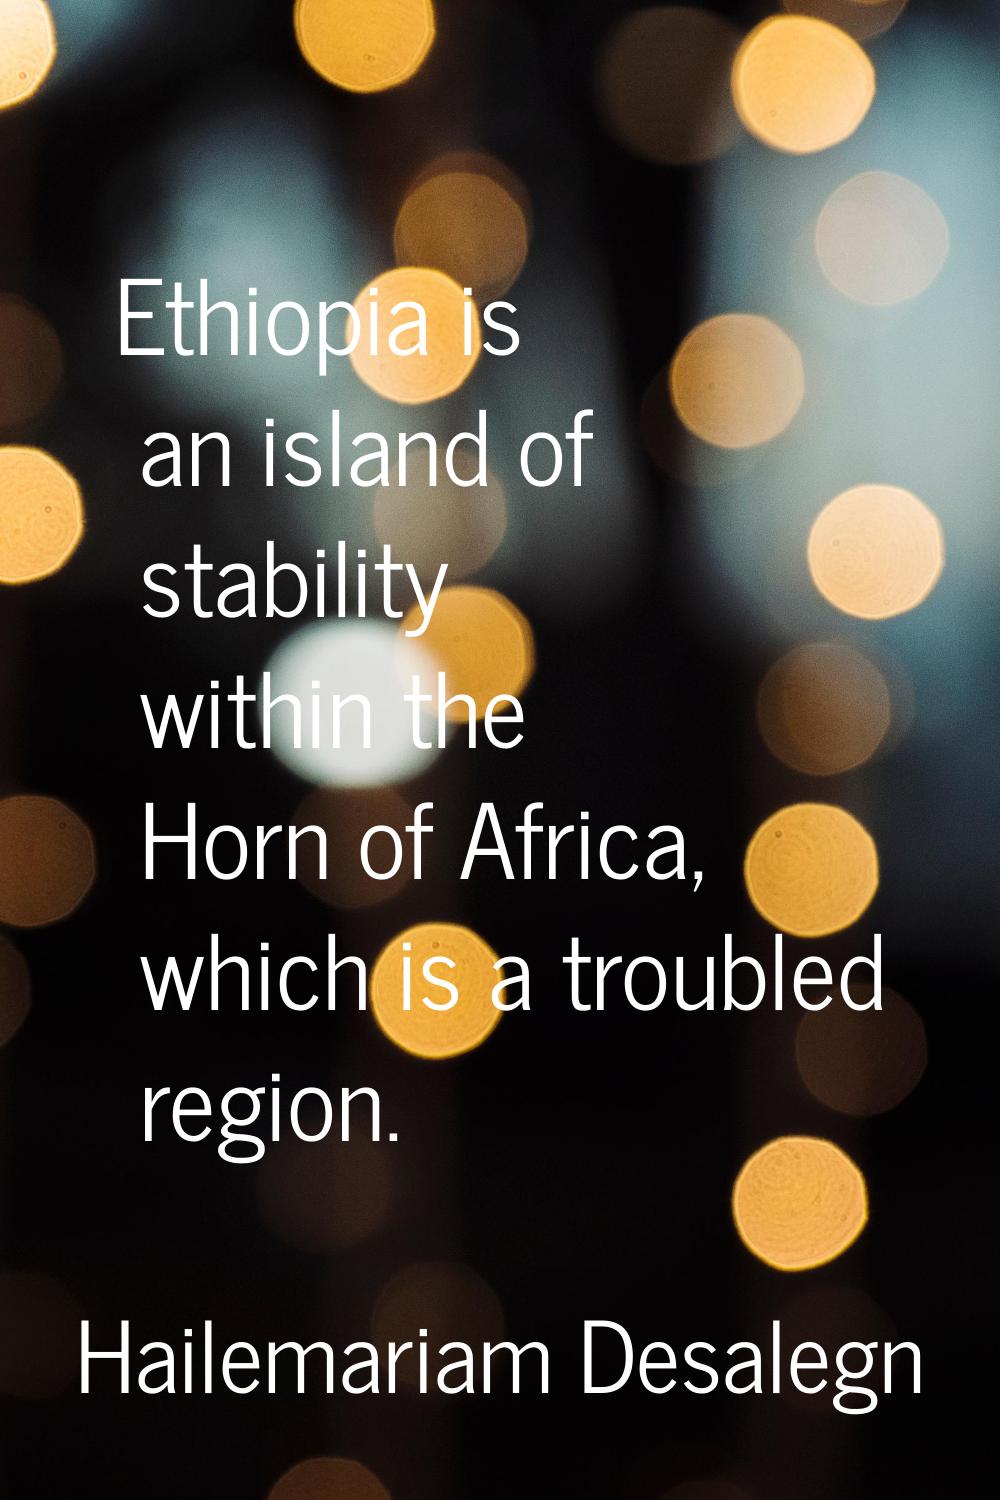 Ethiopia is an island of stability within the Horn of Africa, which is a troubled region.